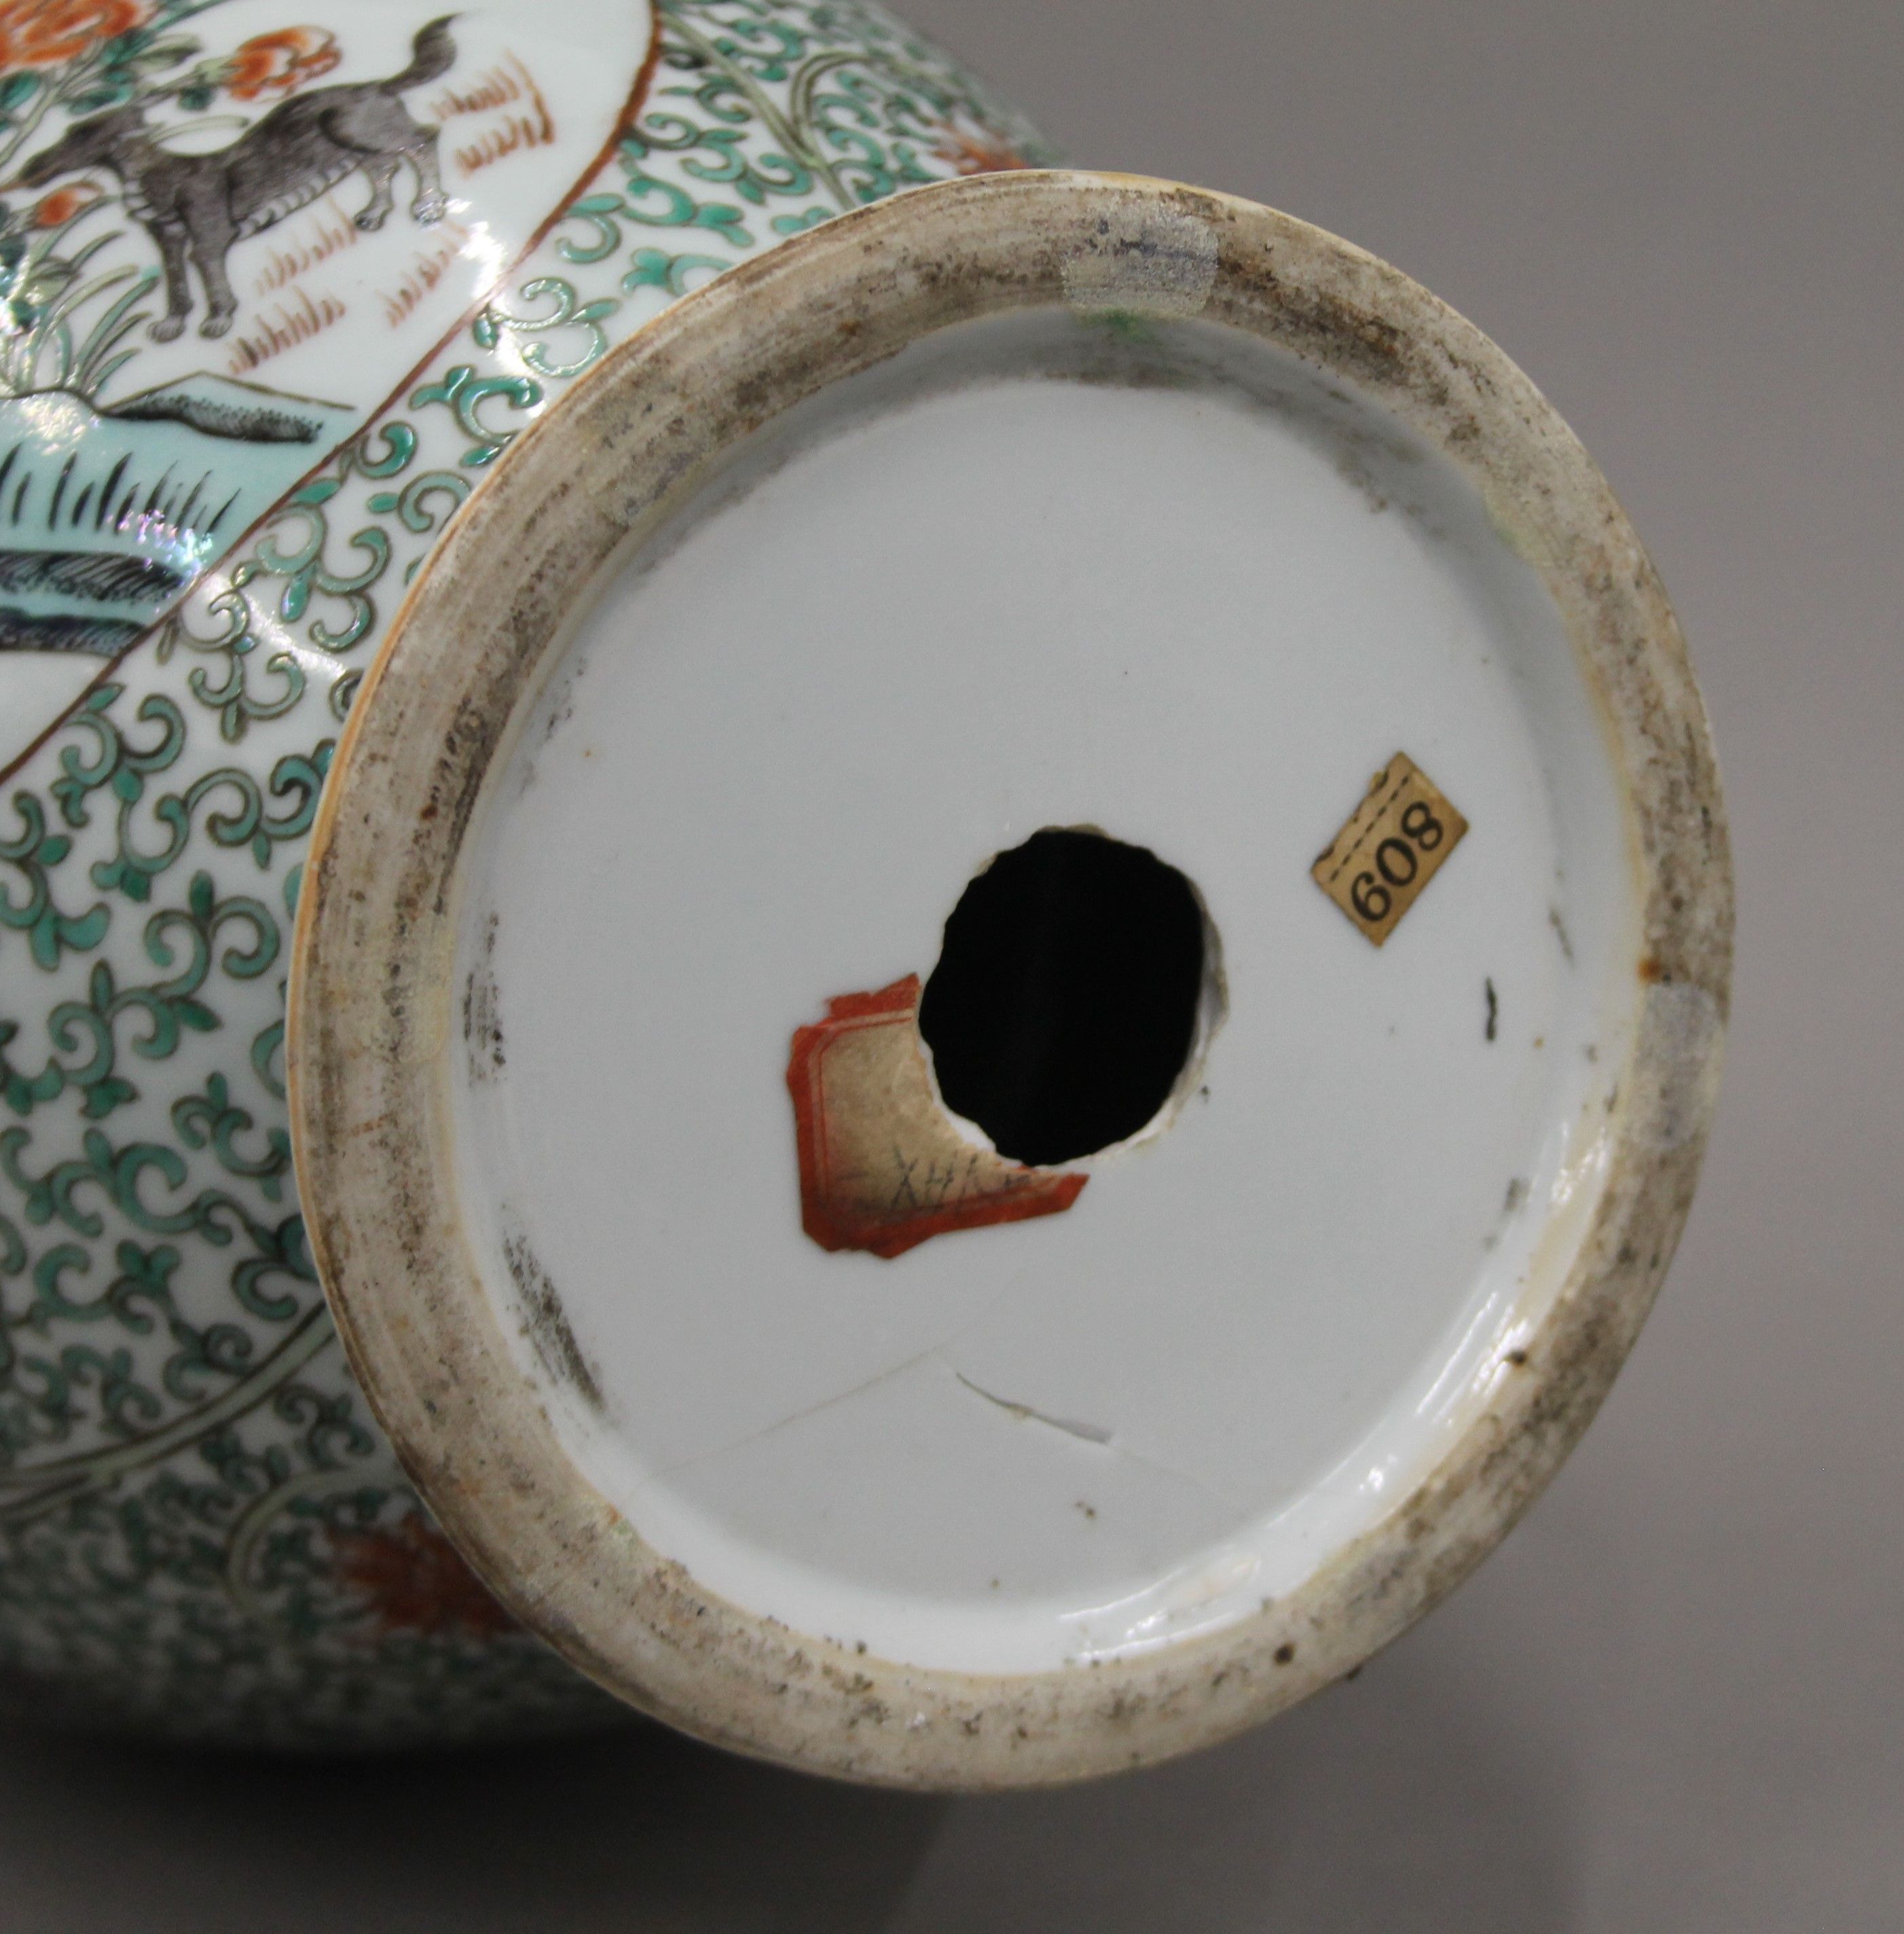 A 19th century Chinese porcelain famille verte vase with an ovoid body and flaring neck. 44 cm high. - Image 6 of 8